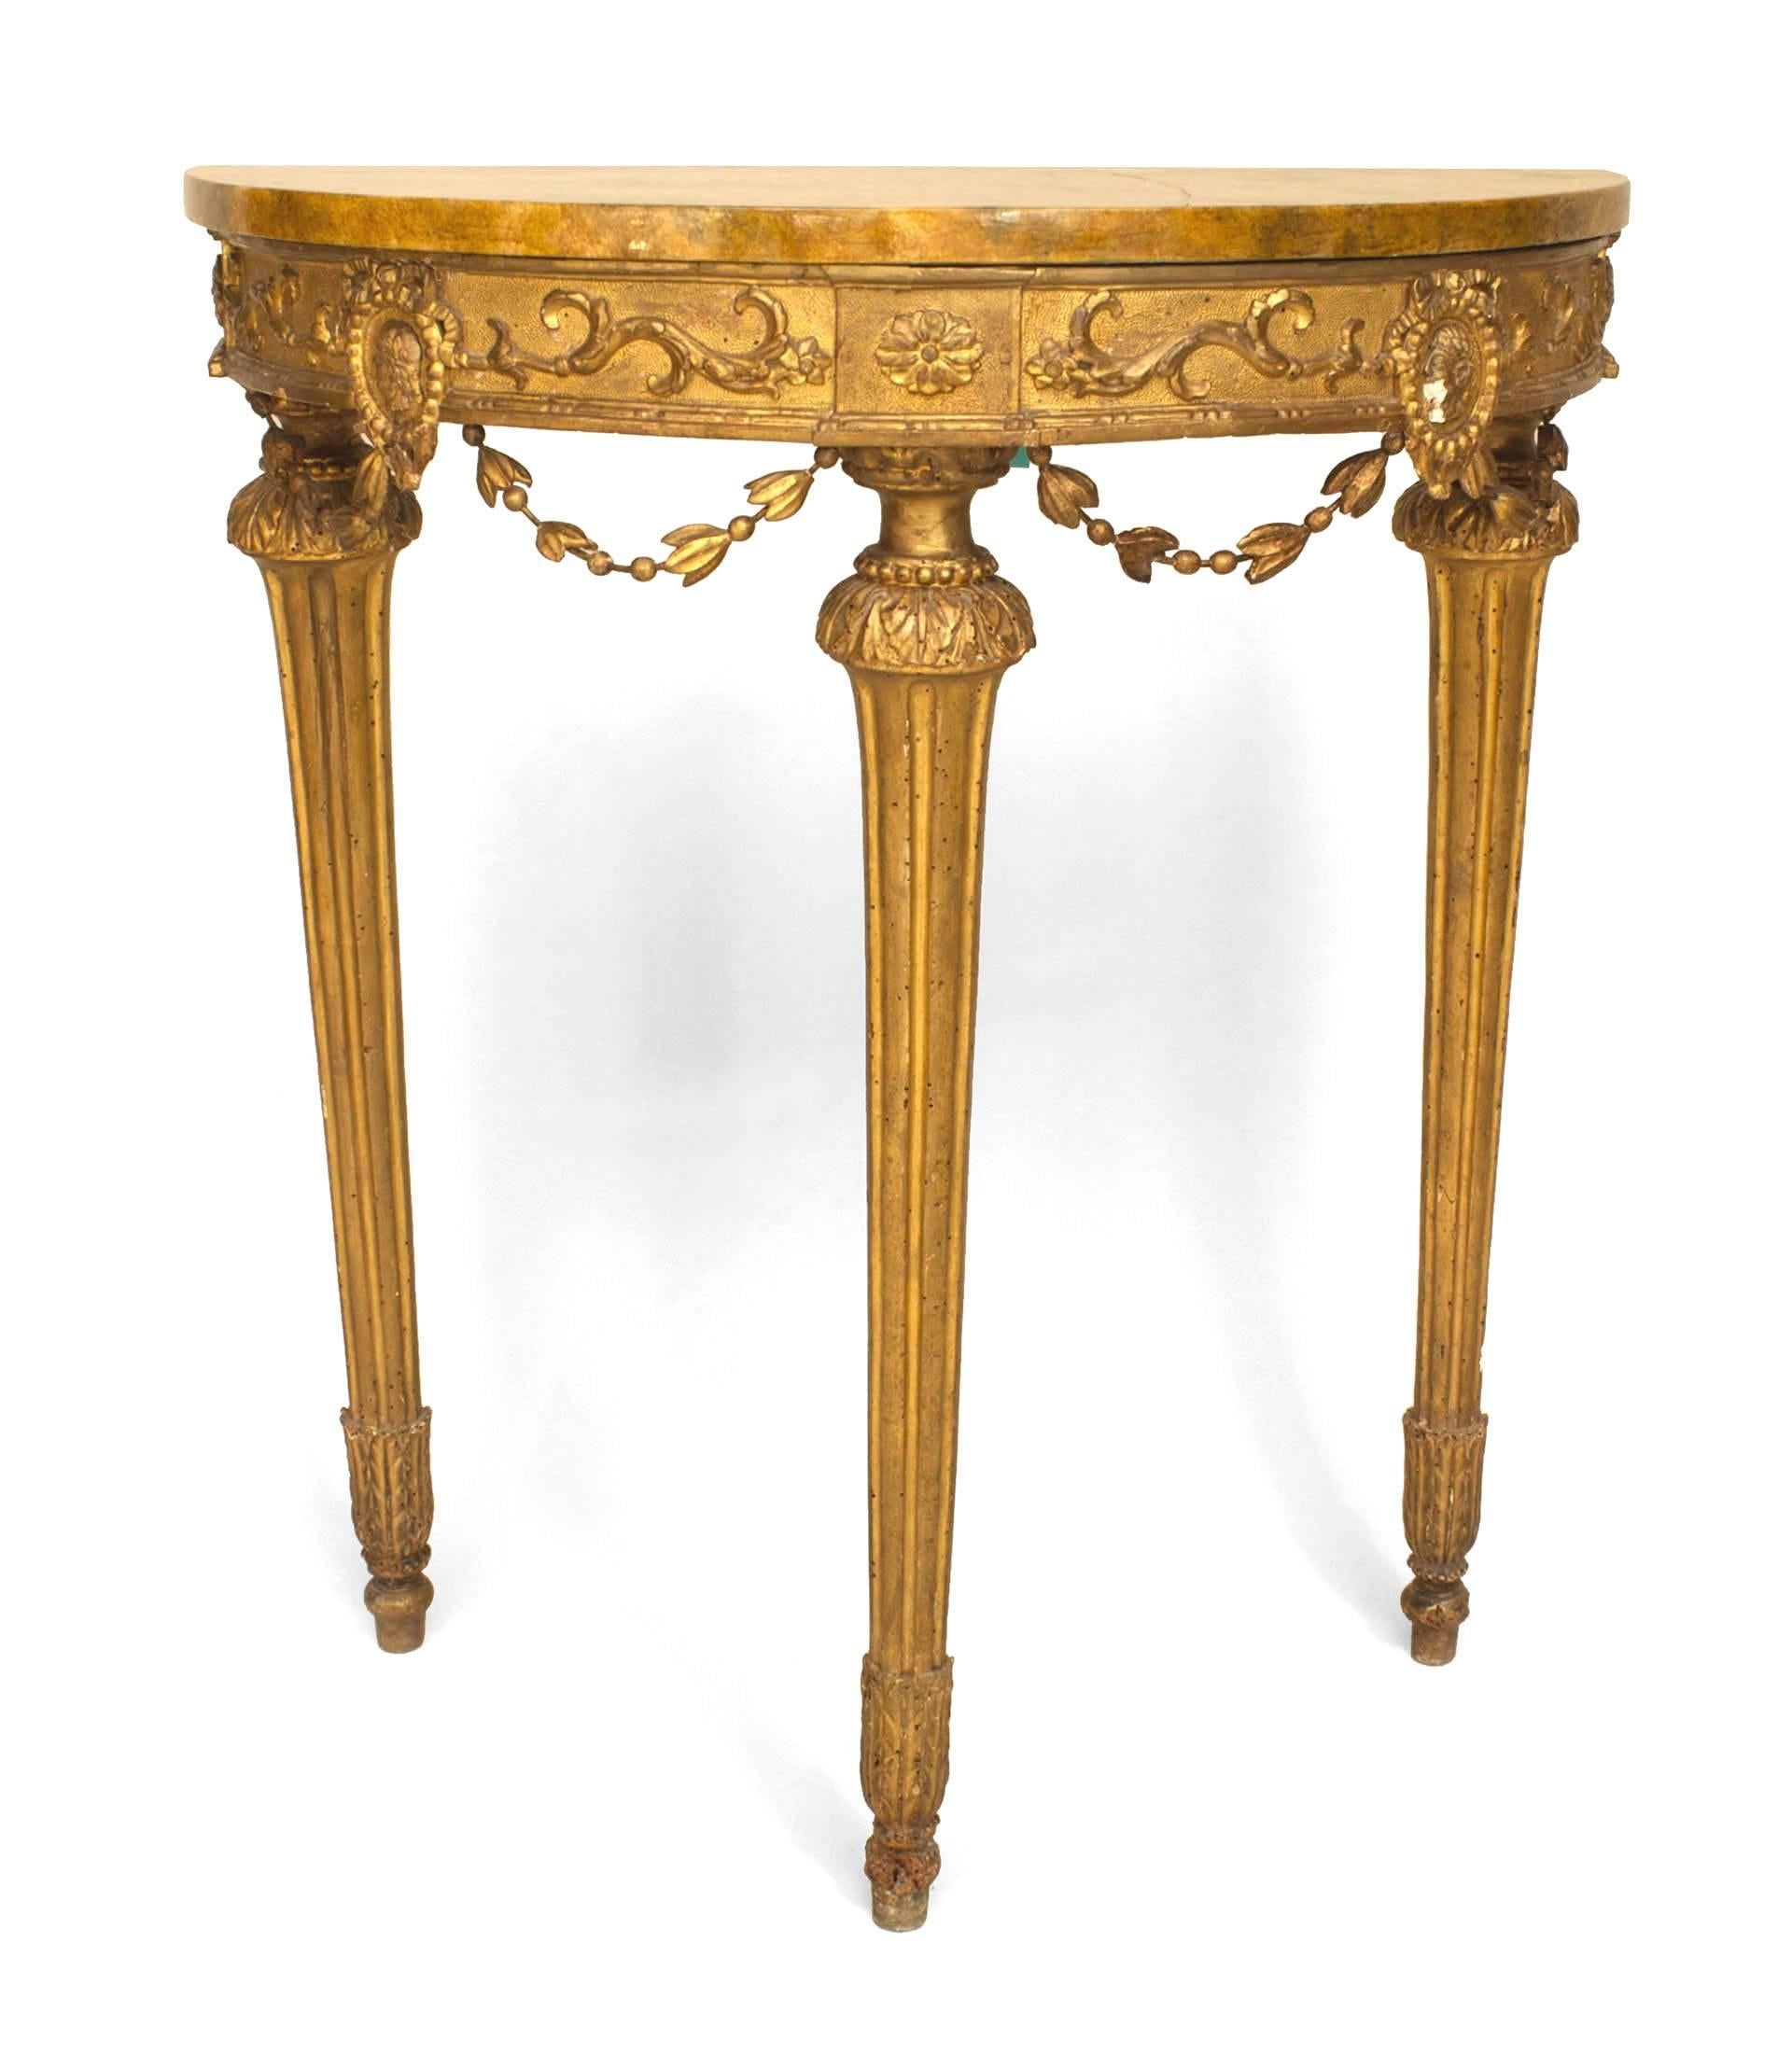 Italian Neo-classic (Late 18th Century) gilt wood demilune console table with a faux painted Sierra marble top above carved festoons and supported on 3 fluted legs.
